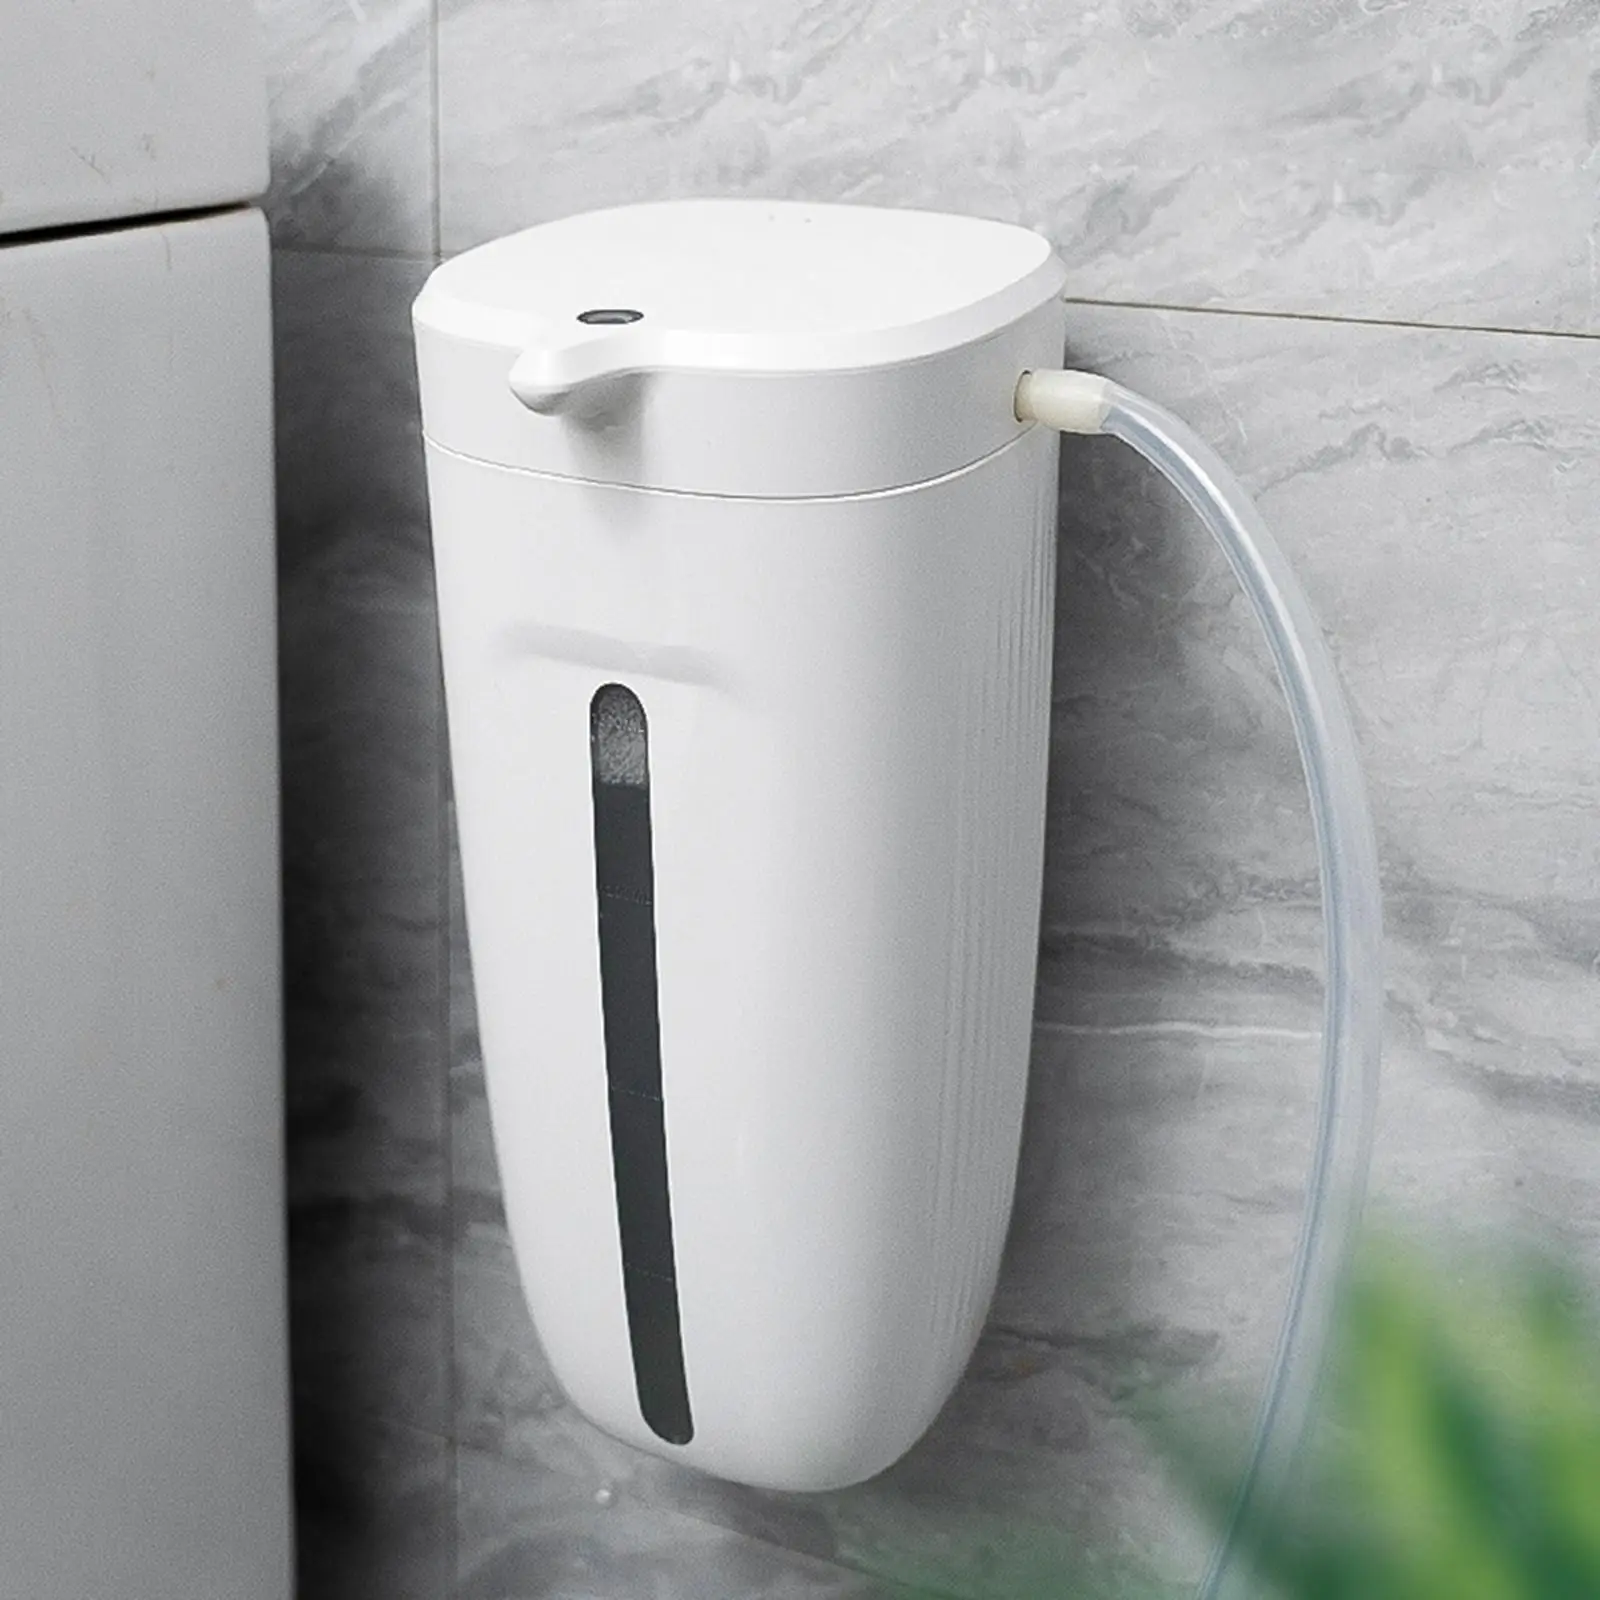 Toilet Cleaning System Portable Inductive Design White Touchless Waterproof